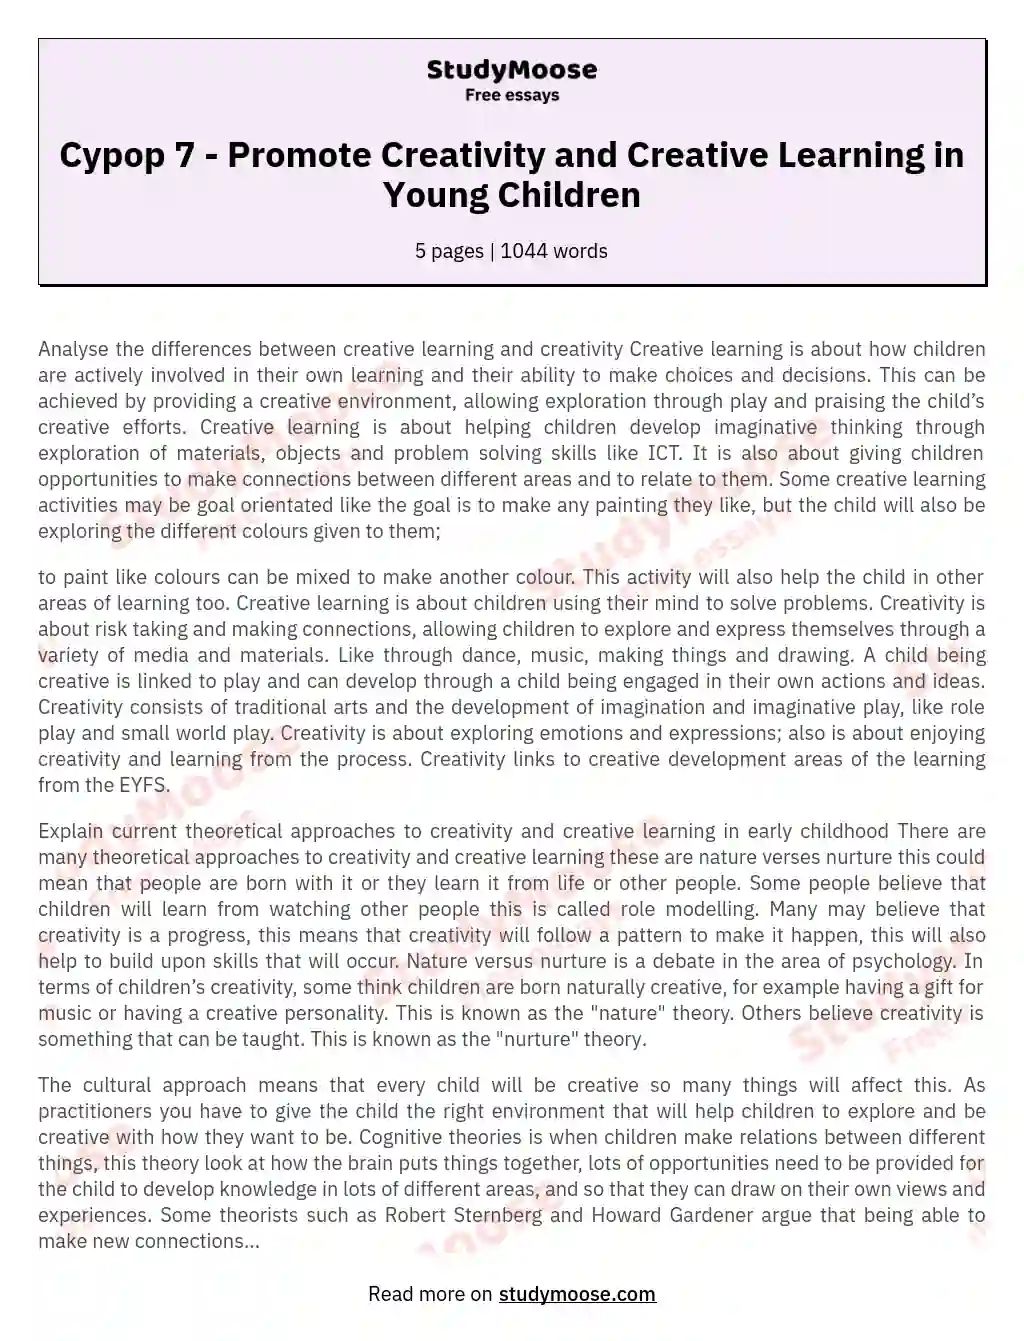 Cypop 7 - Promote Creativity and Creative Learning in Young Children essay